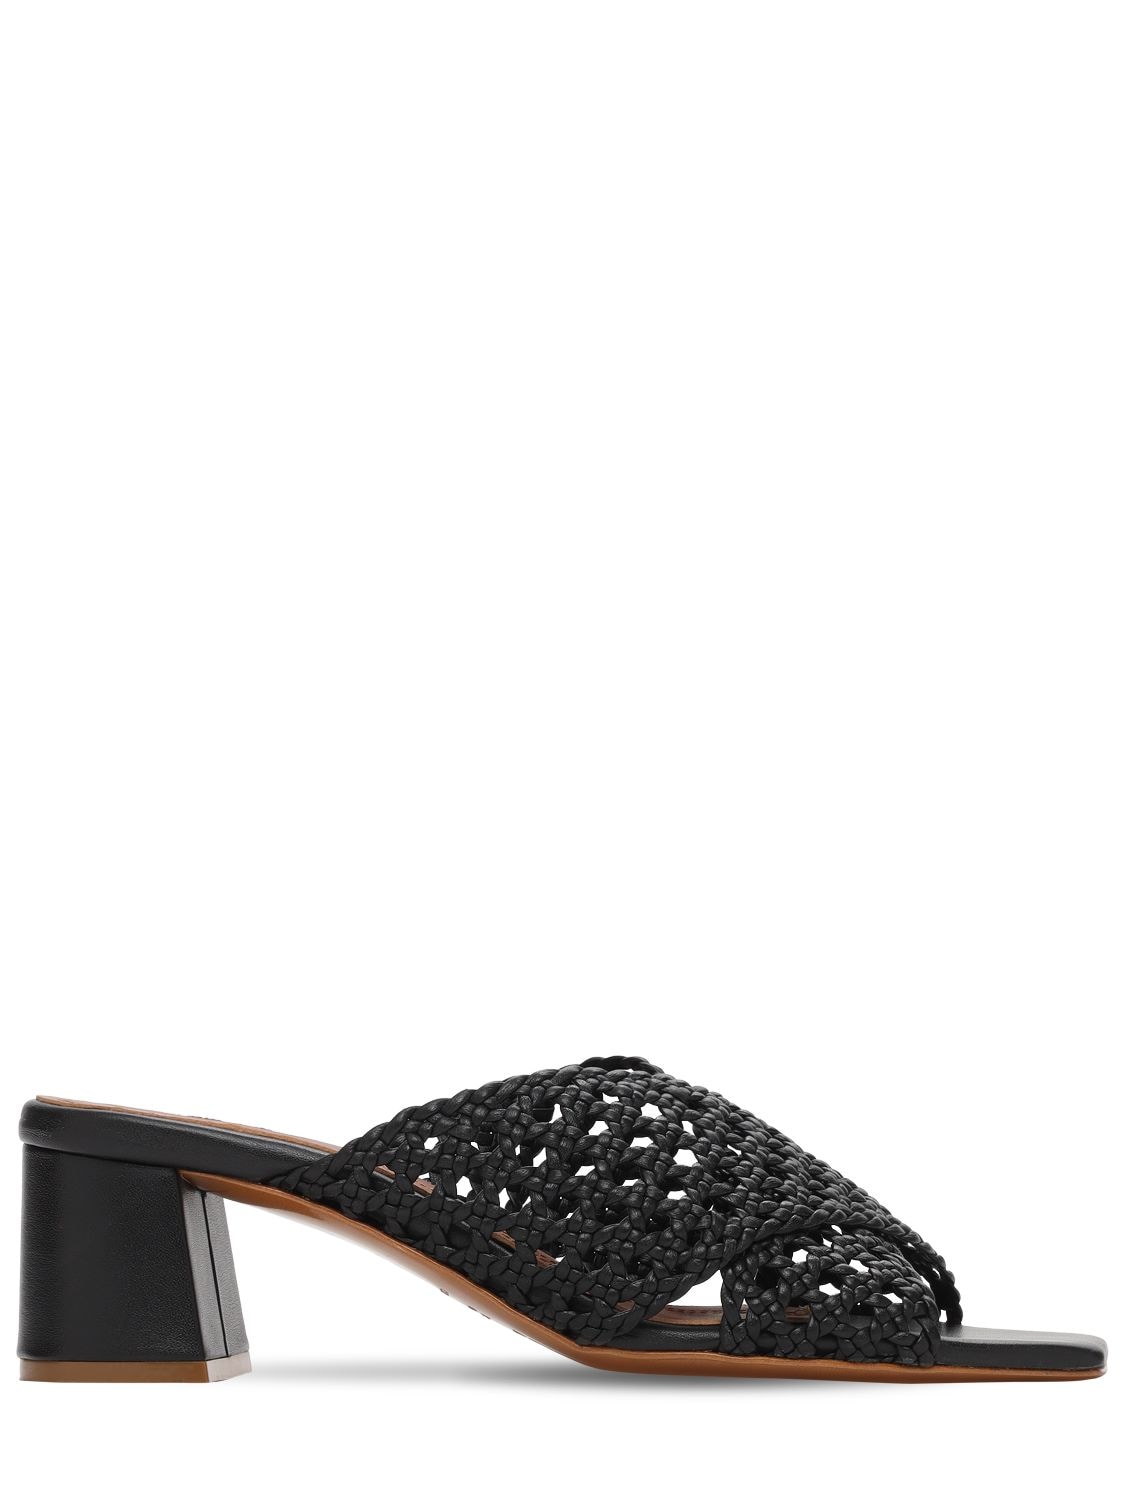 Souliers Martinez 50mm Woven Metallic Leather Mules In Black